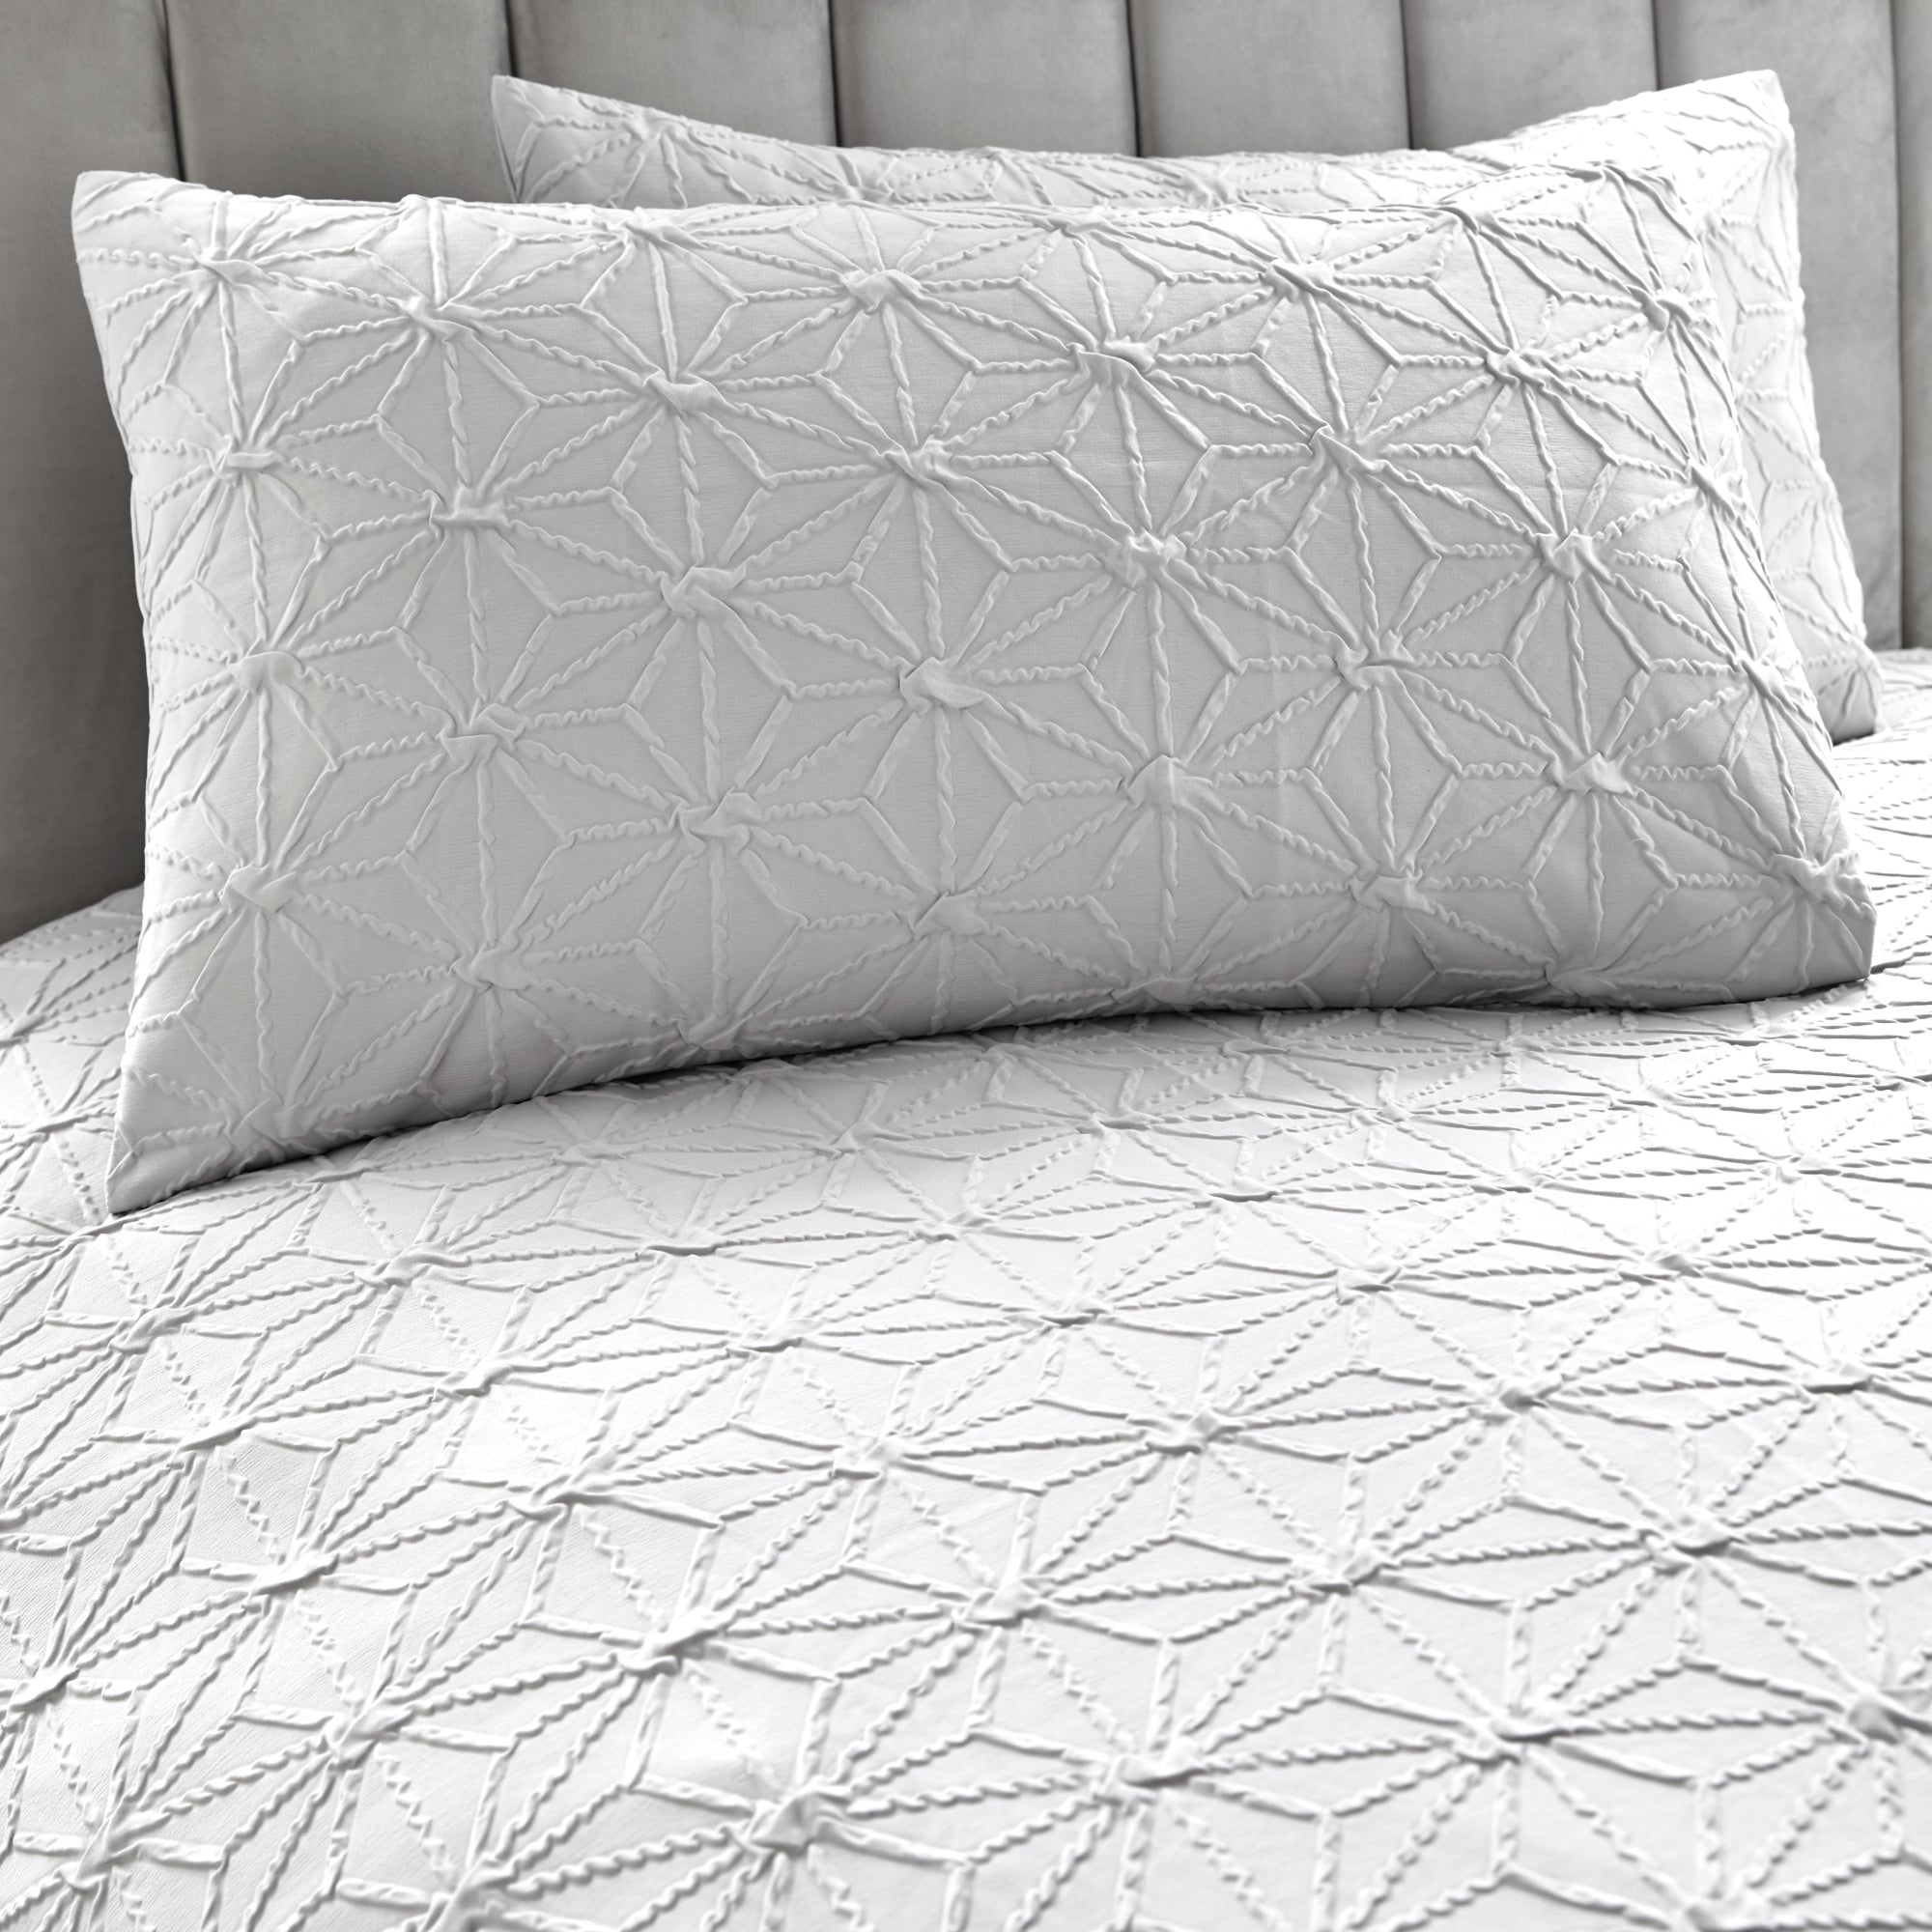 Duvet Cover Set Ruby by By Caprice Home in Silver